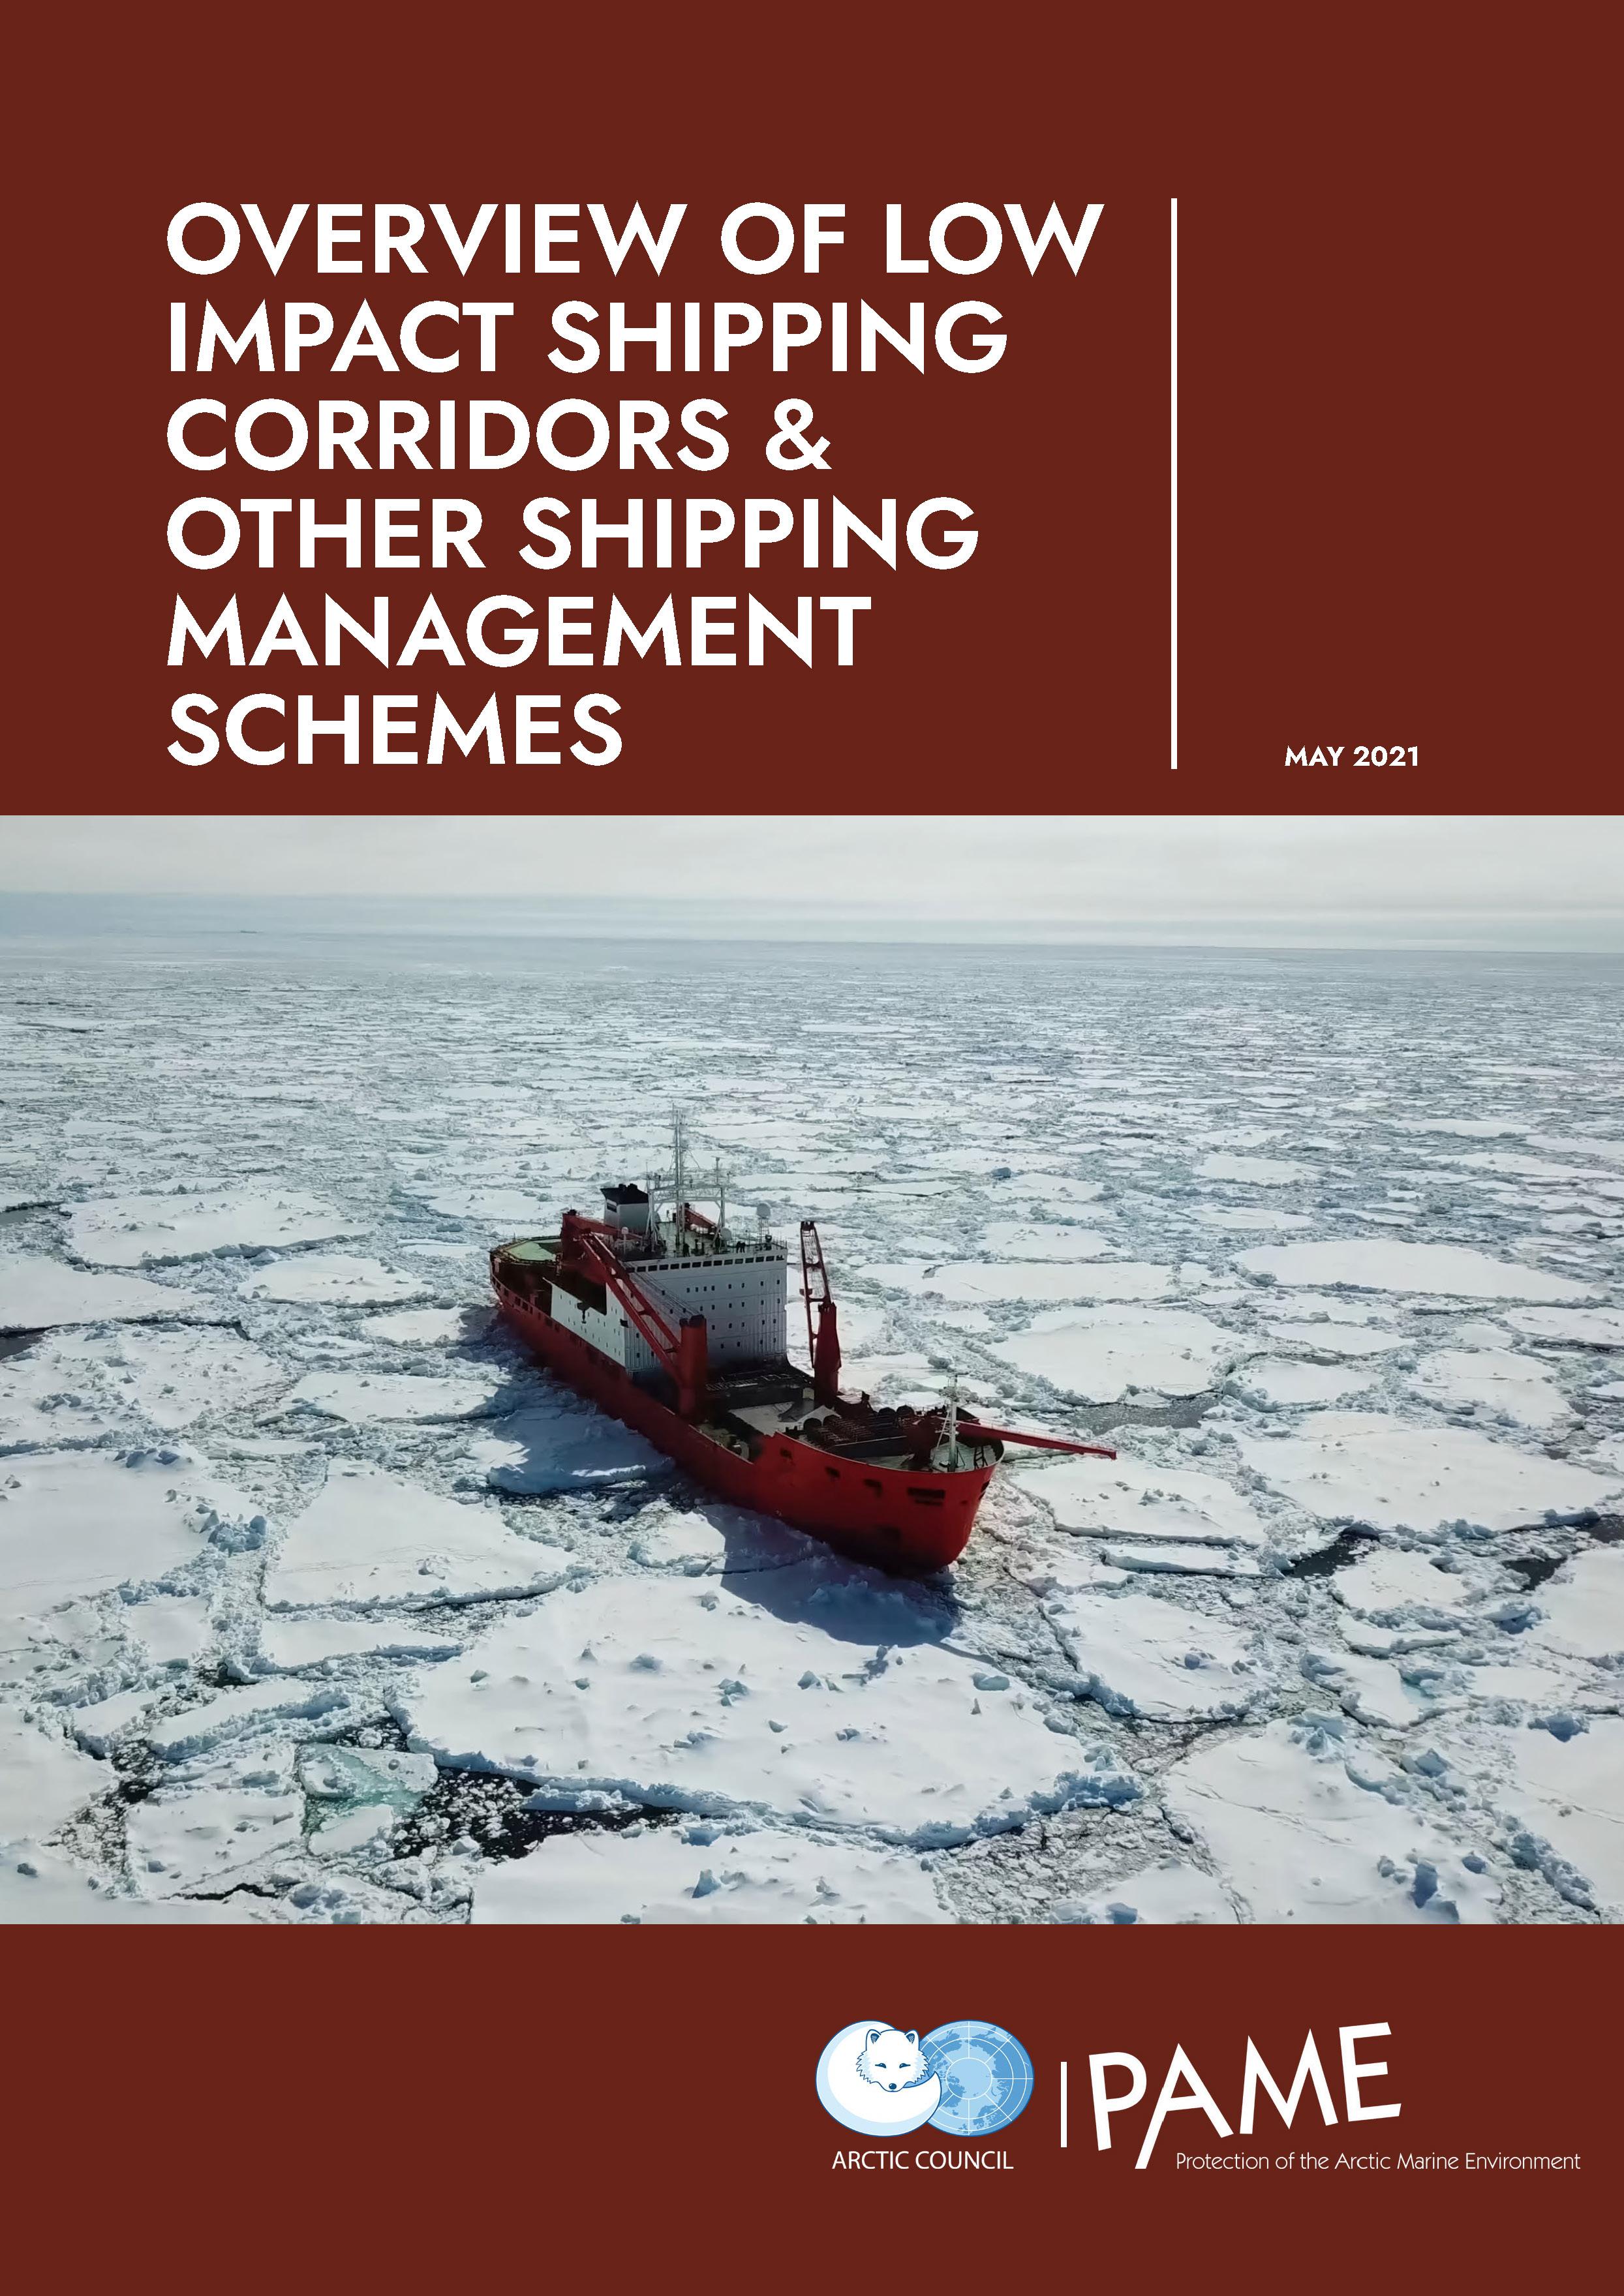 OVERVIEW OF LOW IMPACT SHIPPING CORRIDORS AND OTHER SHIPPING MANAGEMENT SCHEMES